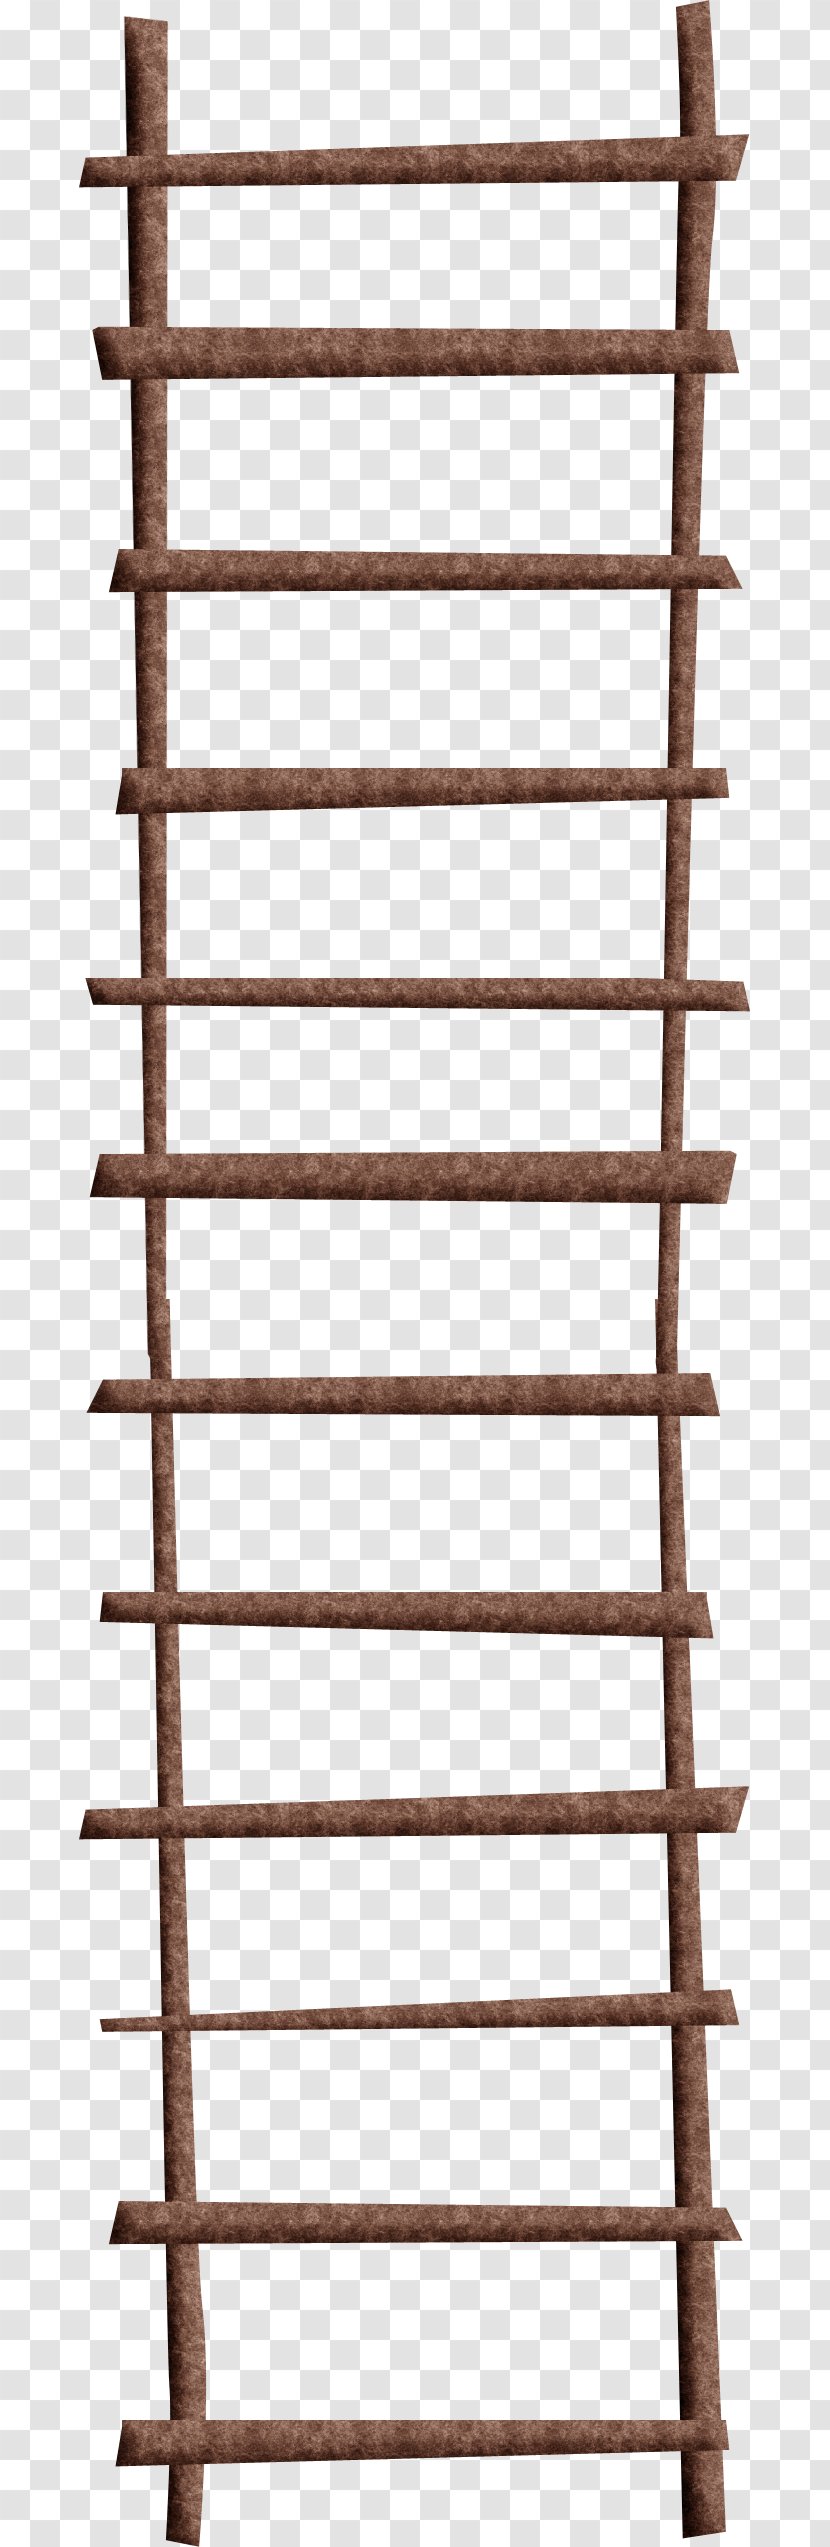 Wood Stairs Ladder - Animation - Cartoon Transparent PNG